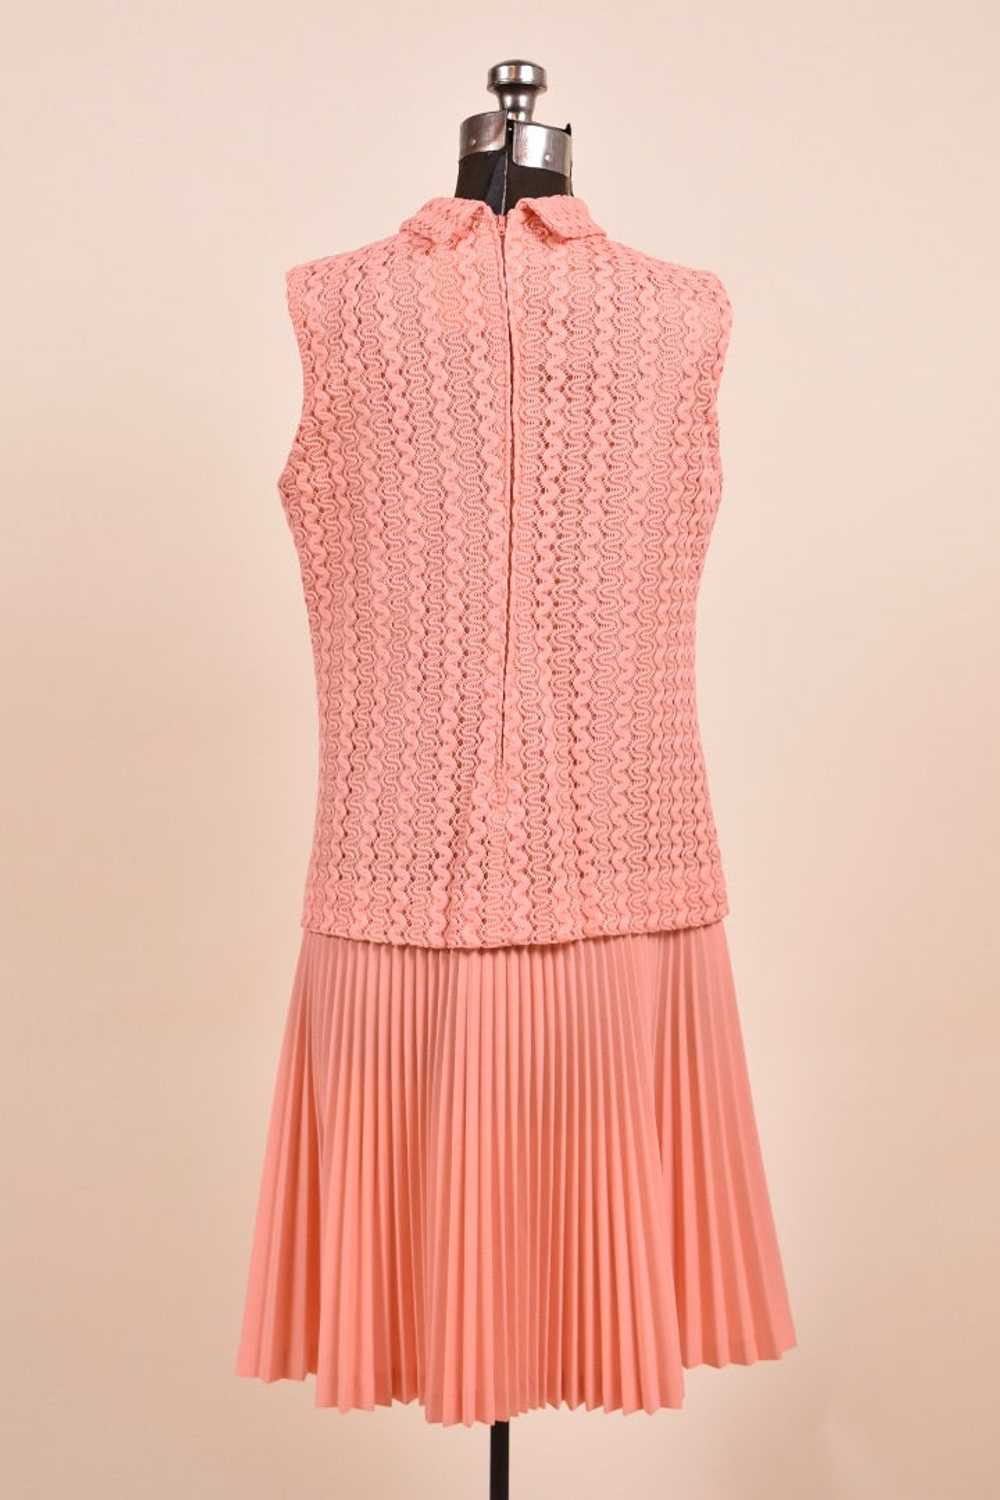 70s Neon Peach Squiggle Lace Dress with Pleated S… - image 3